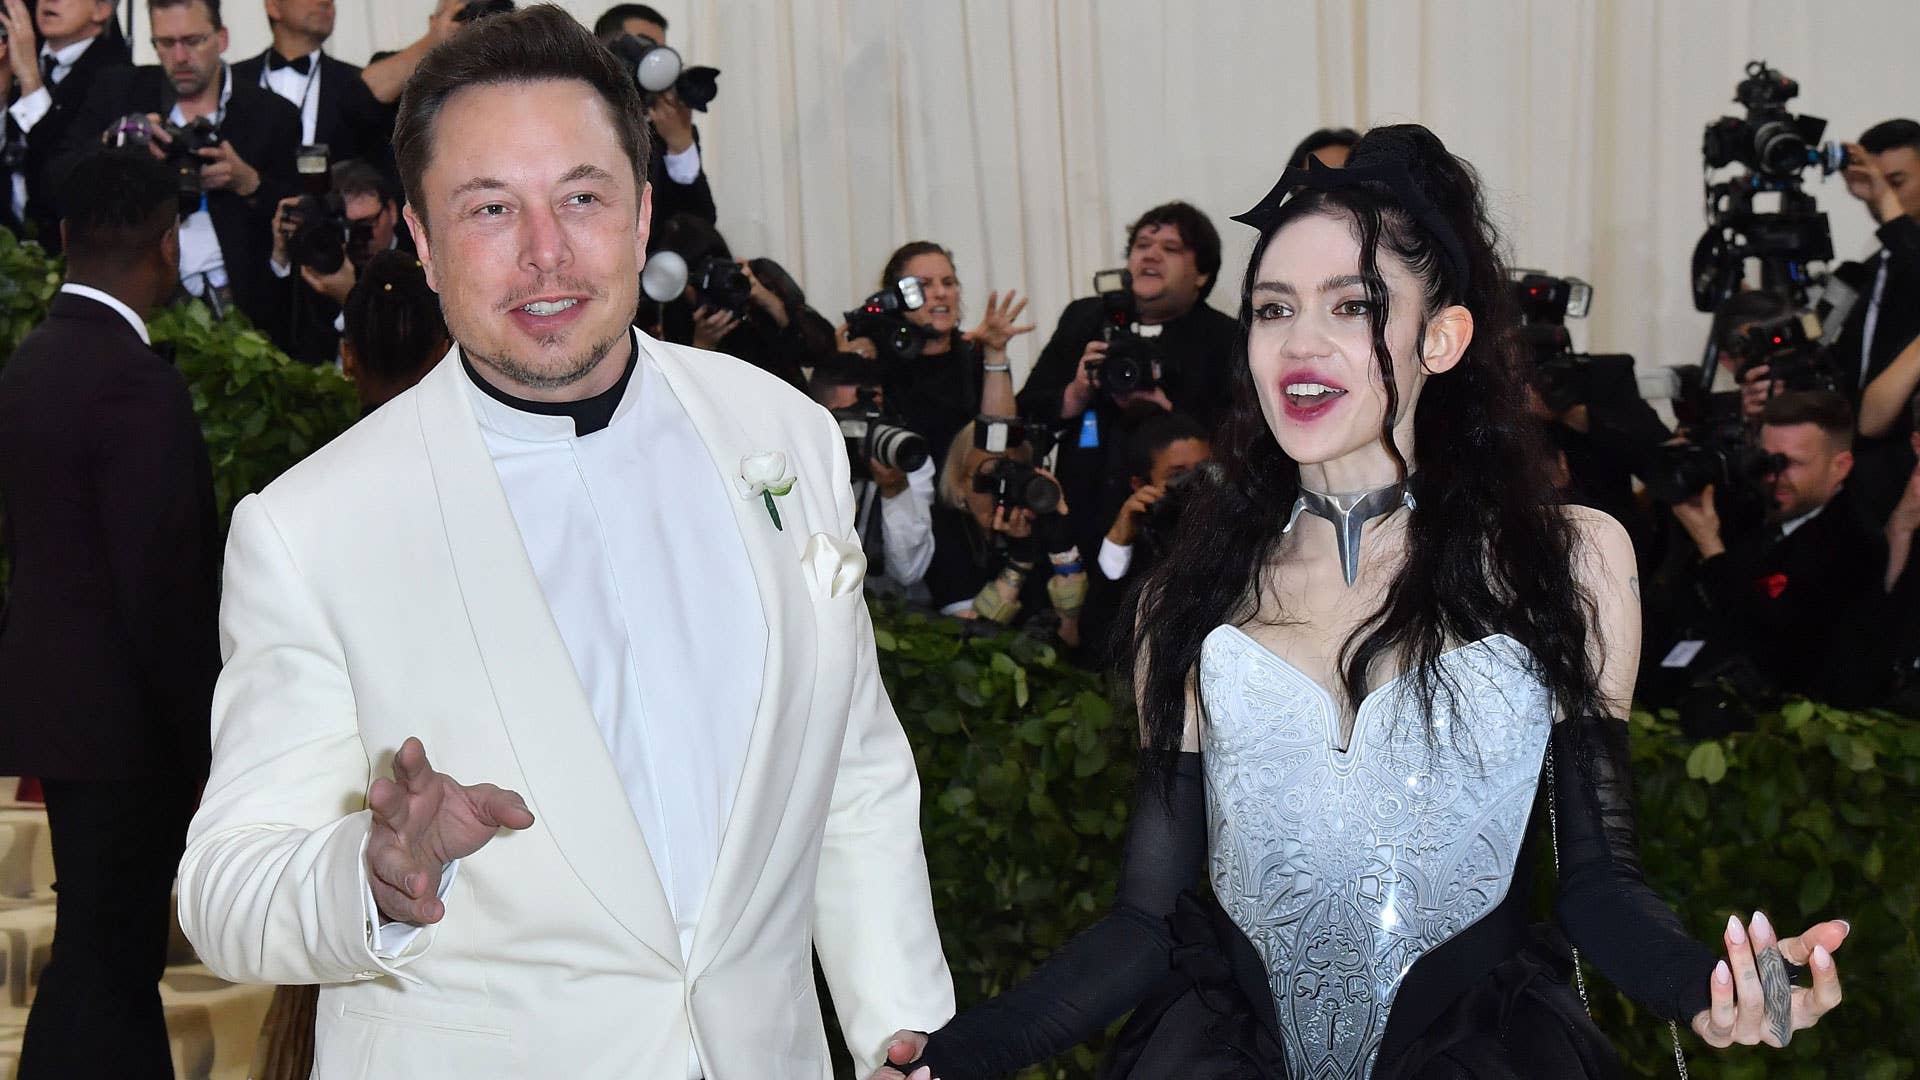 Elon Musk and Grimes at the 2018 Met Gala